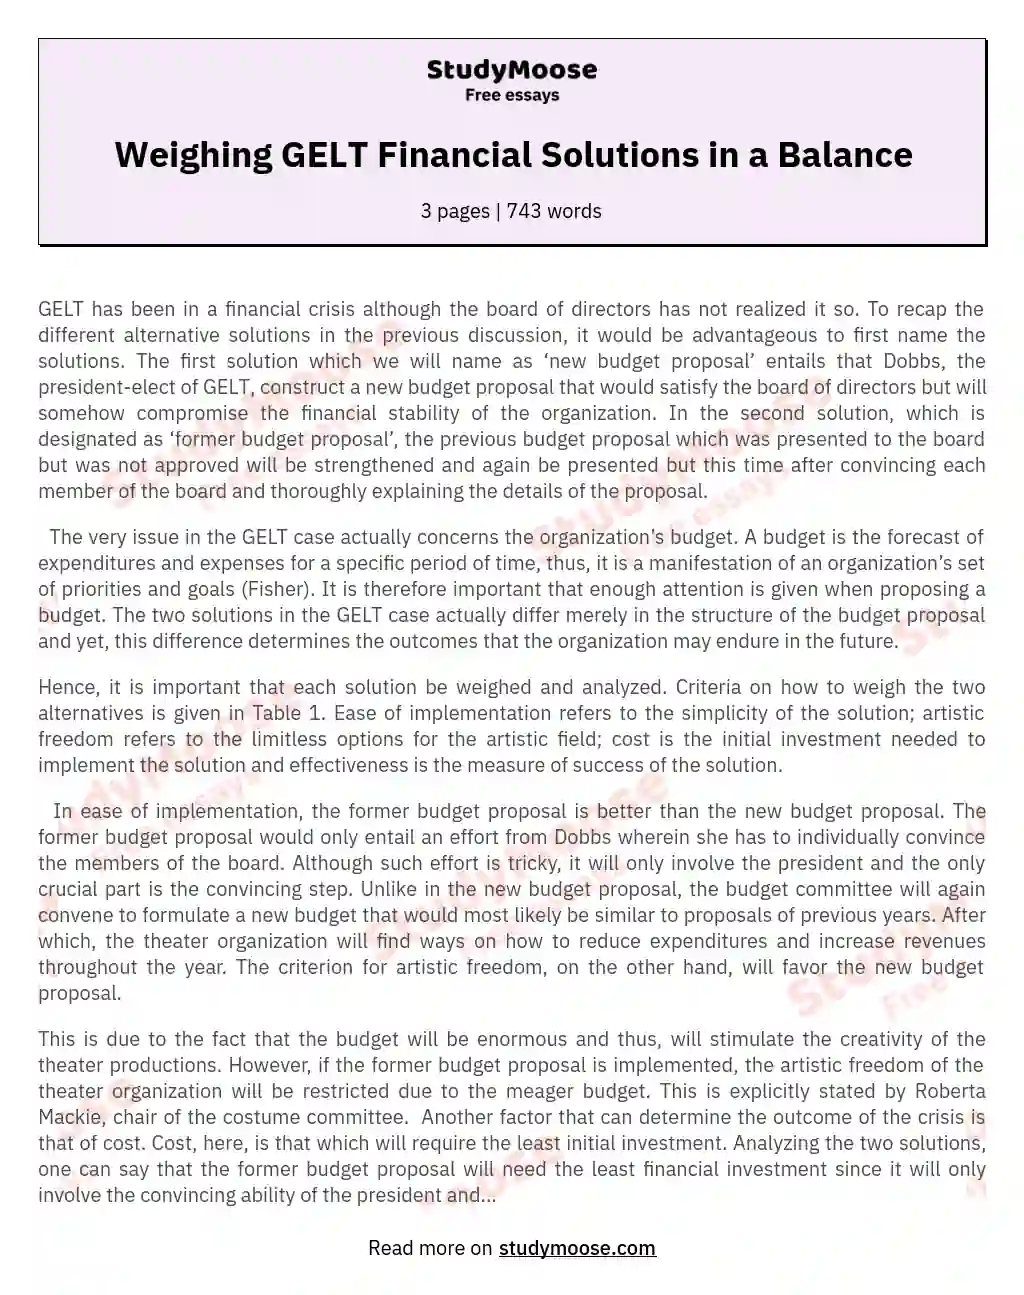 Weighing GELT Financial Solutions in a Balance essay